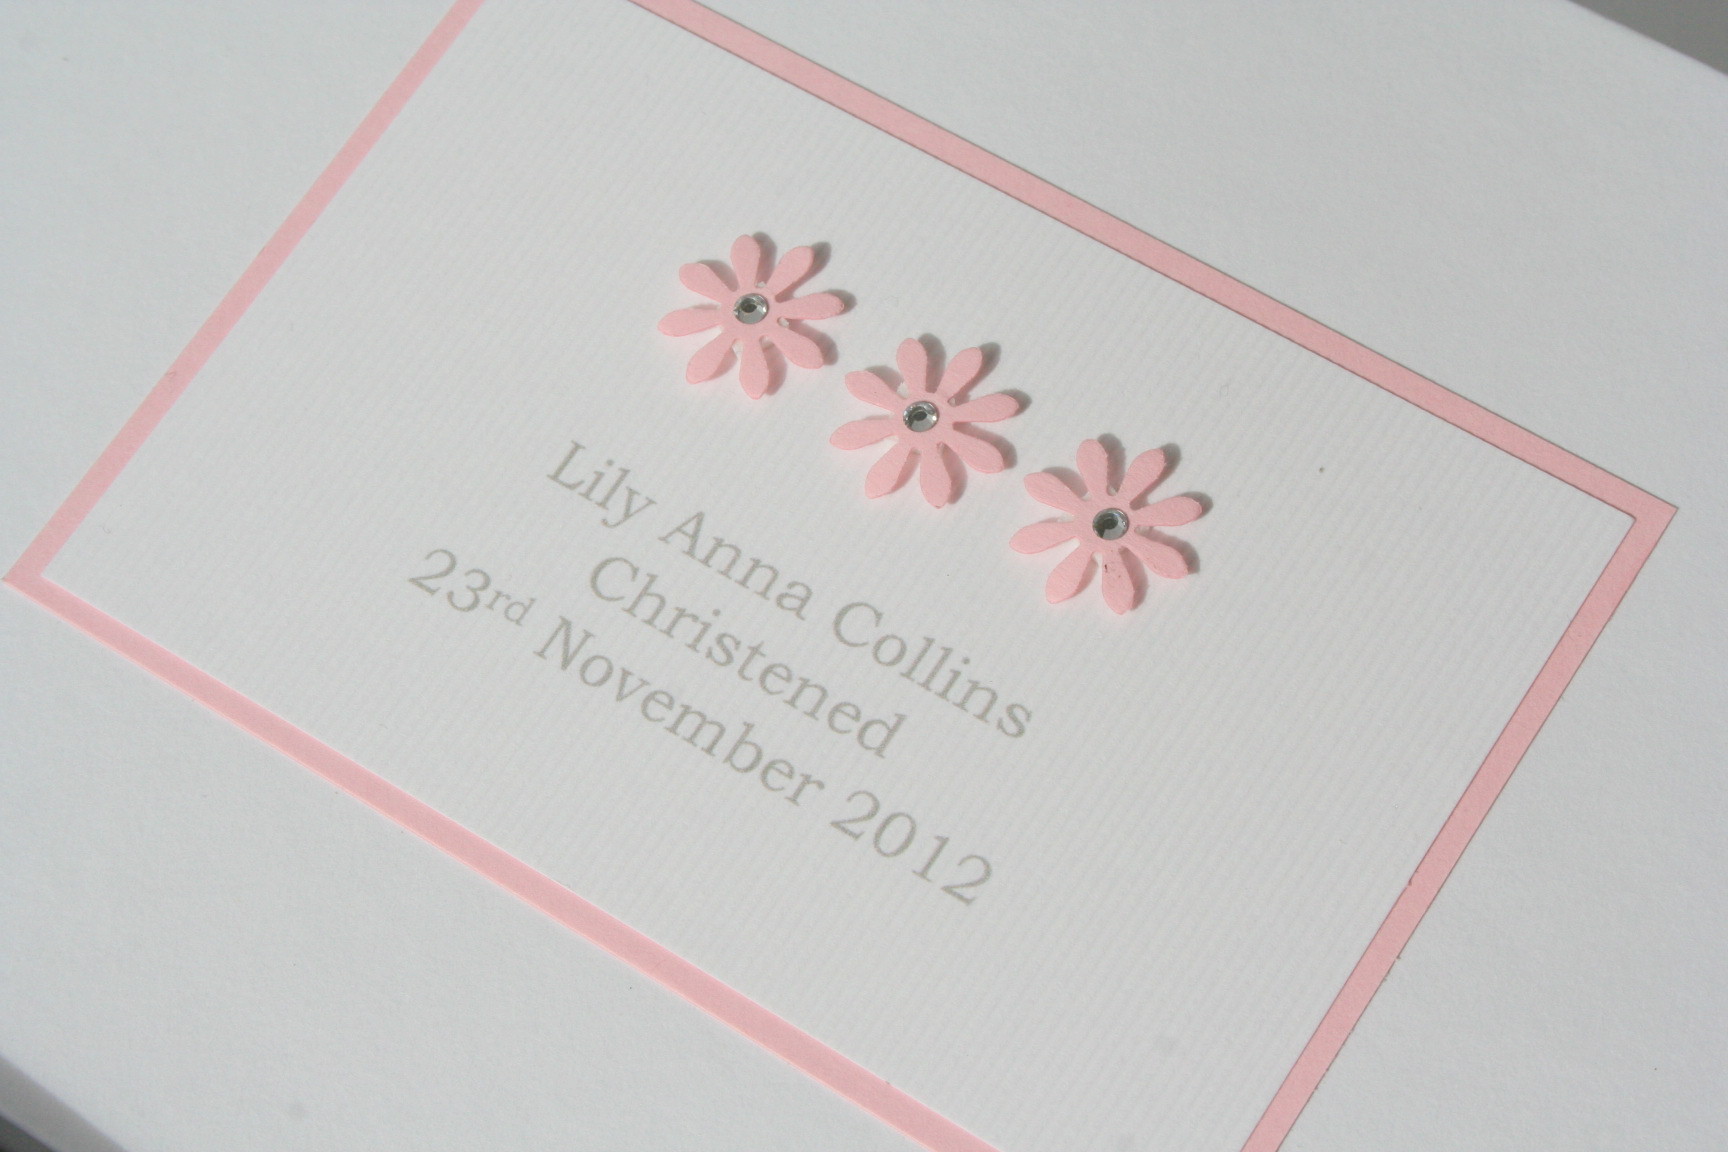 Little daisies Christening or Naming Day Guest Book